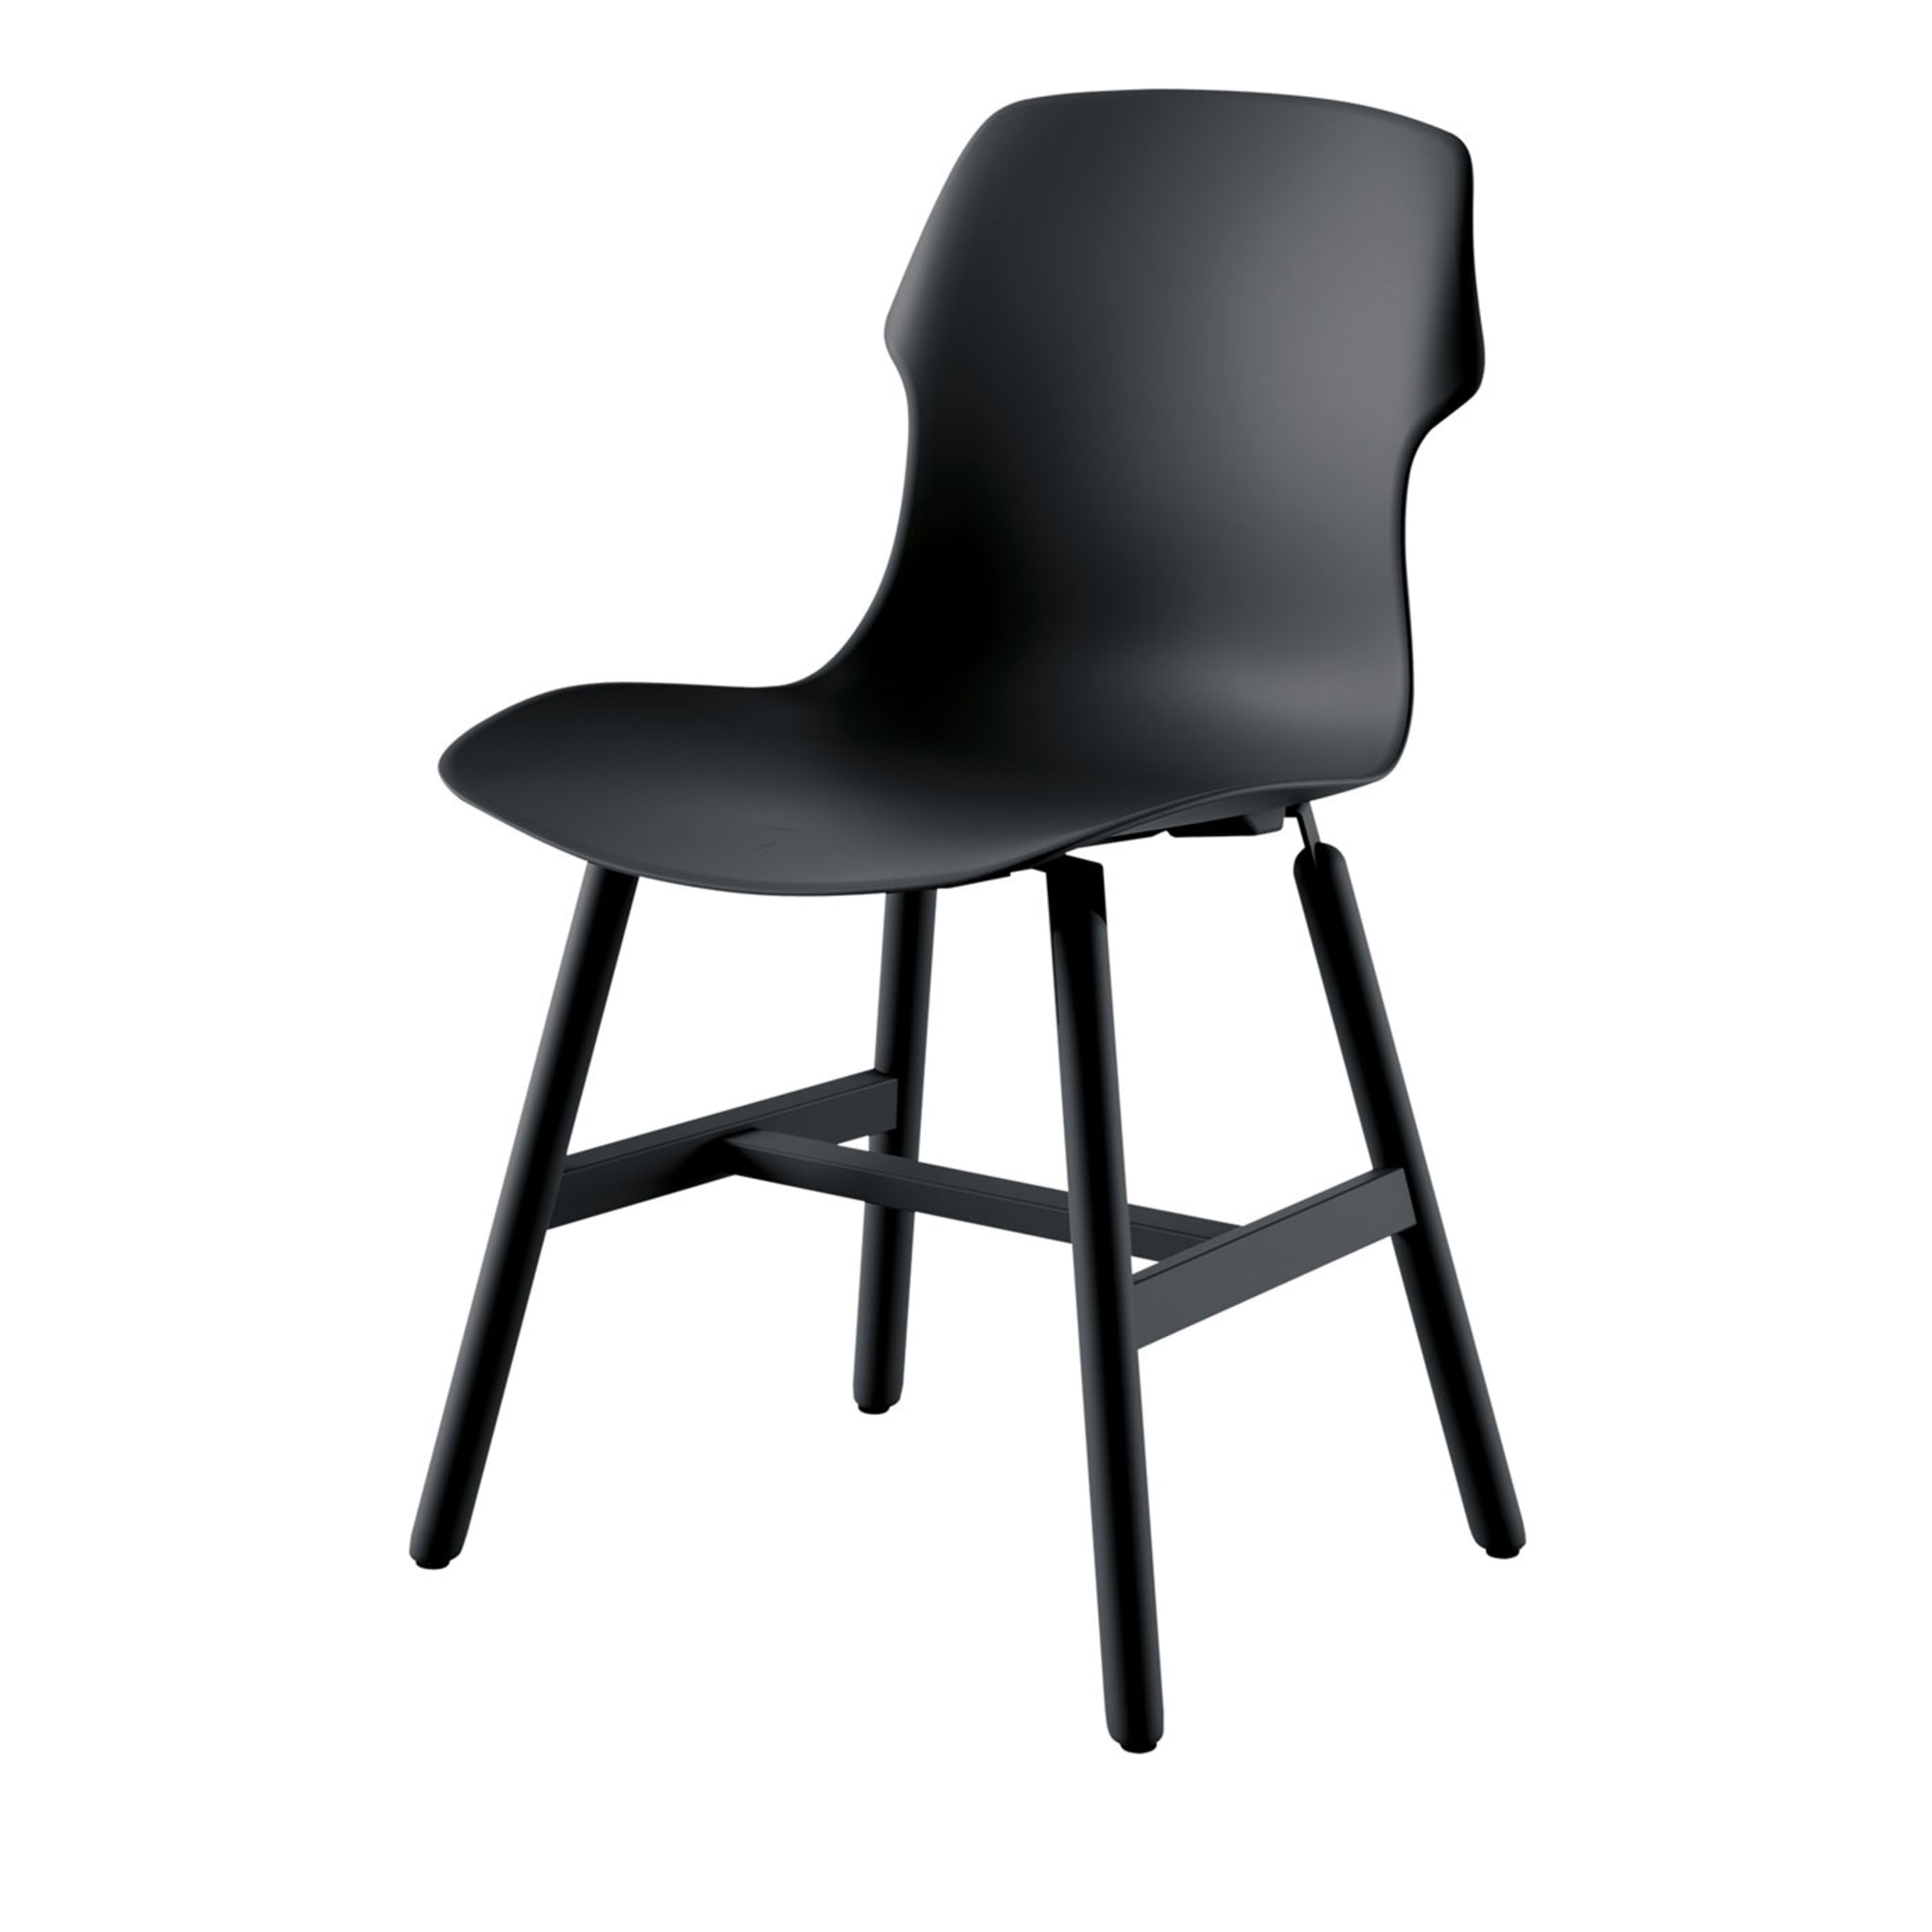 Stereo Set of 2 Black Chairs by Luca Nichetto - Main view